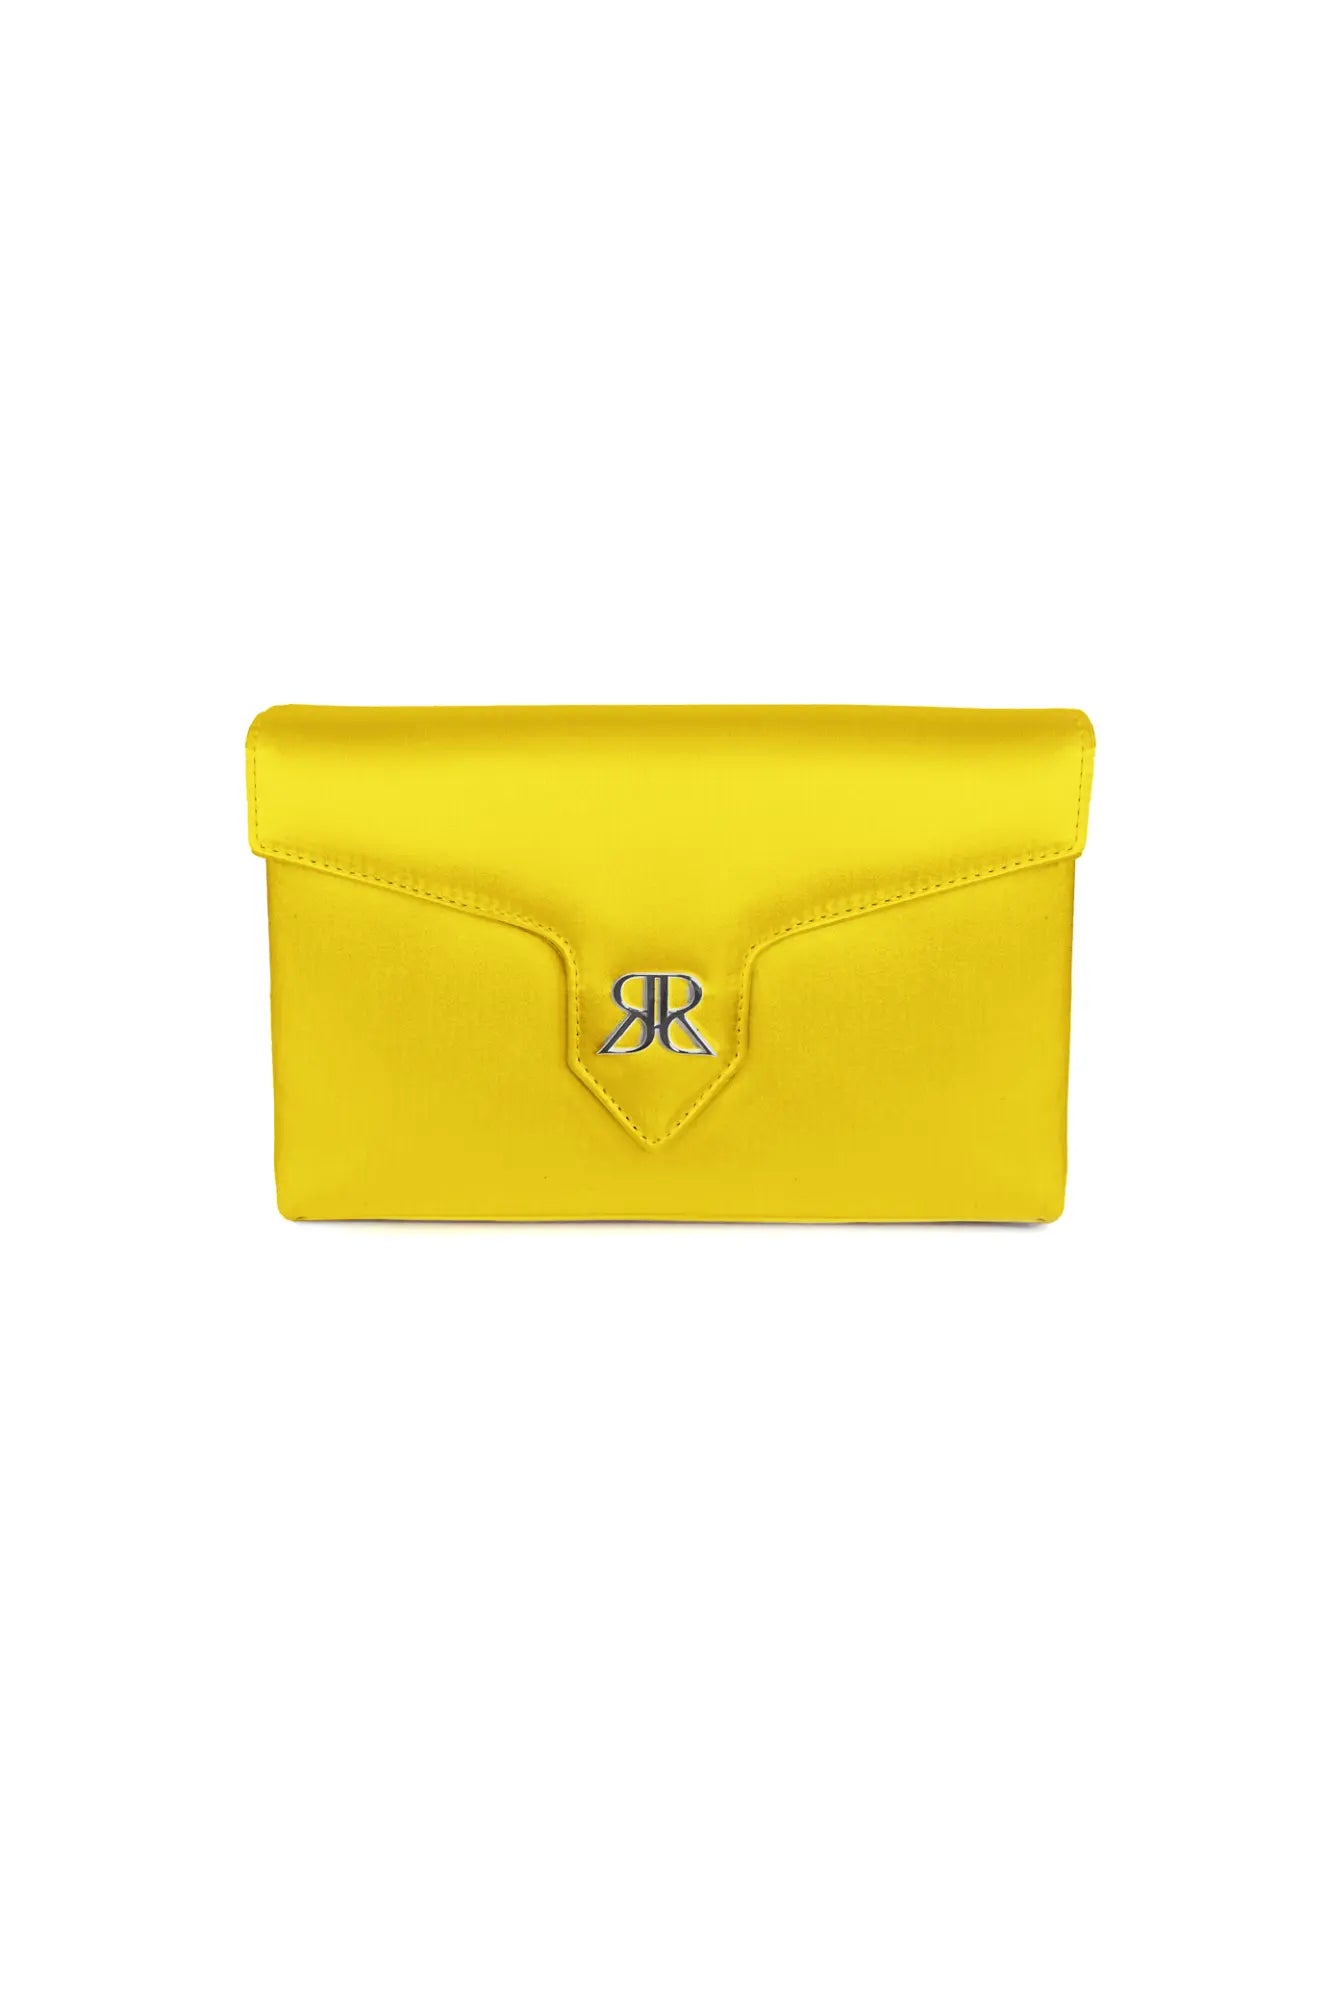 Bright yellow Love Note Envelope Clutch Limoncello Yellow with a monogrammed closure from The Bella Rosa Collection.